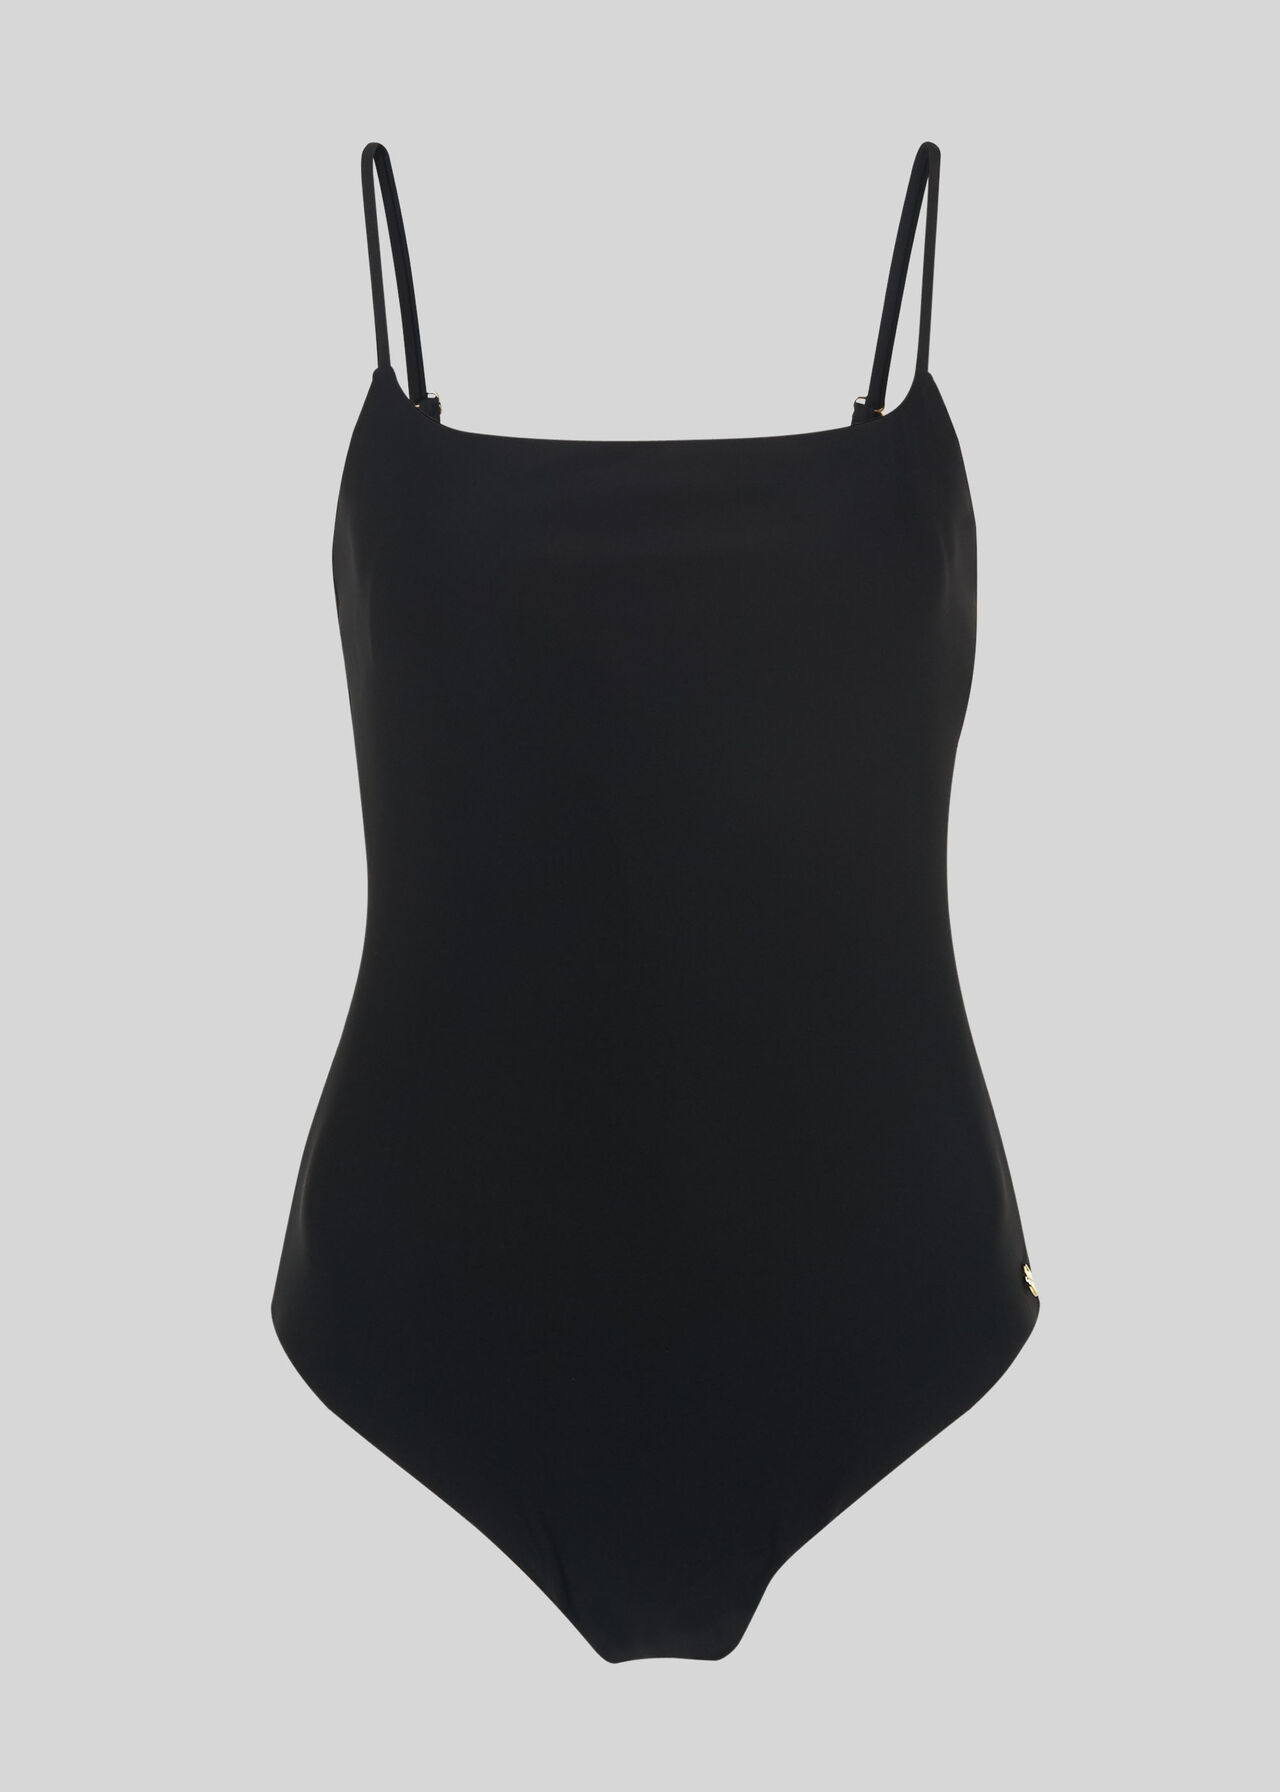 Mossimo Women's Strappy One Piece Swimsuit (X-Small, Black) at   Women's Clothing store